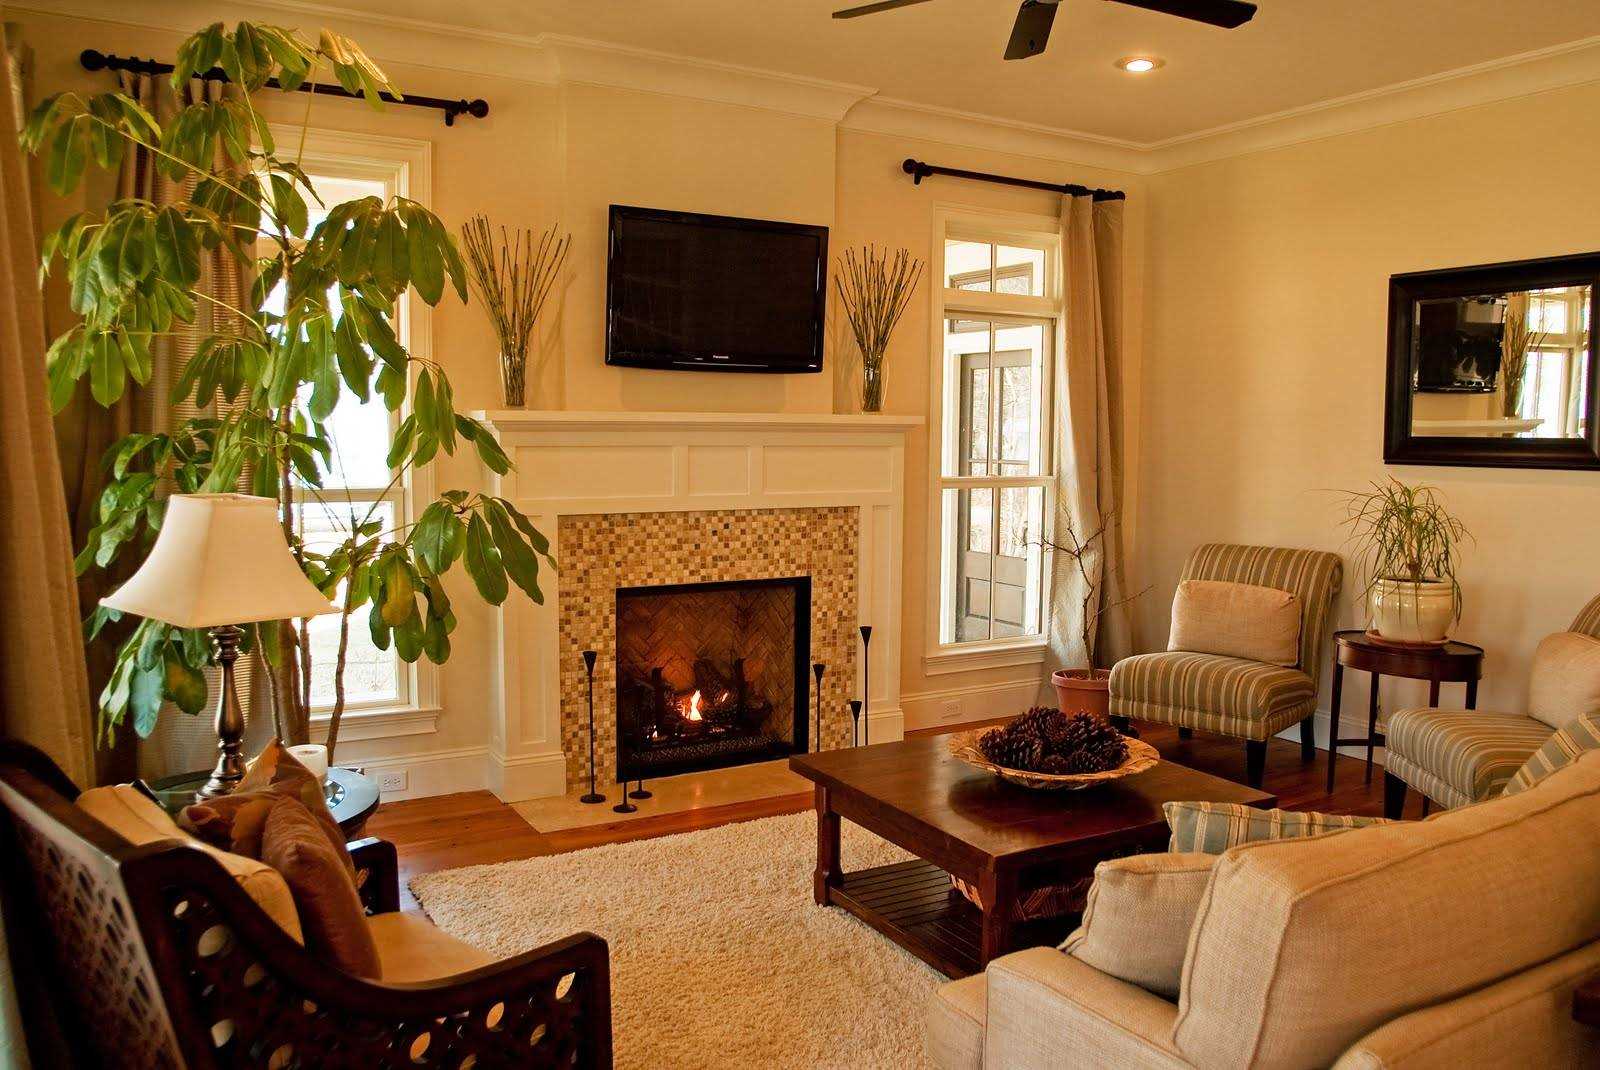 example of a beautiful living room interior with fireplace